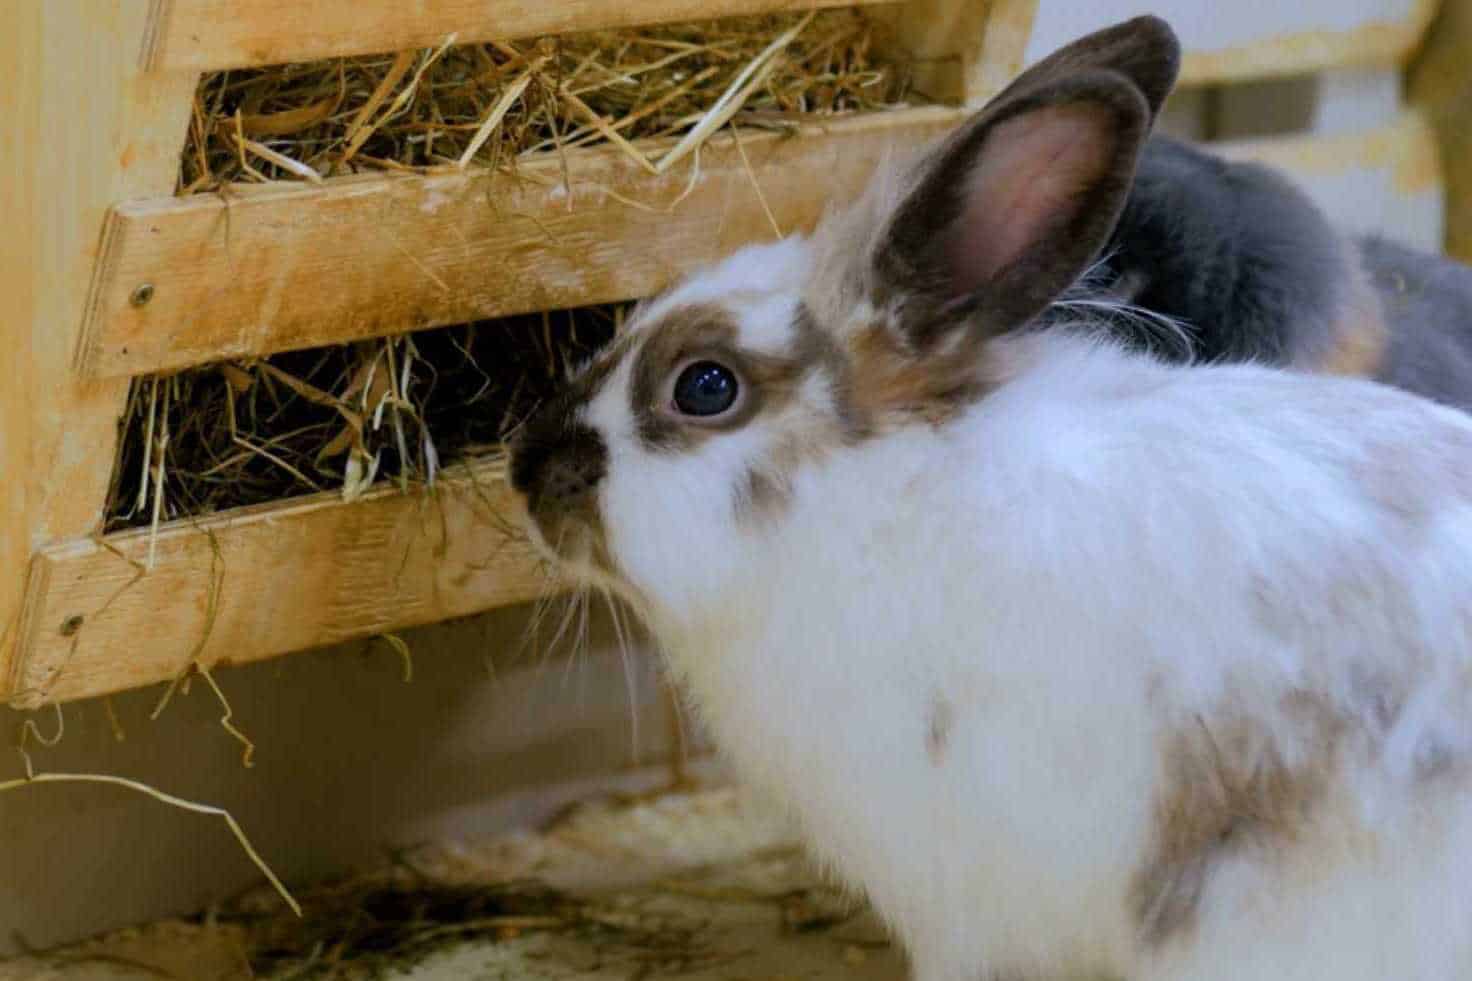 storing hay for rabbits